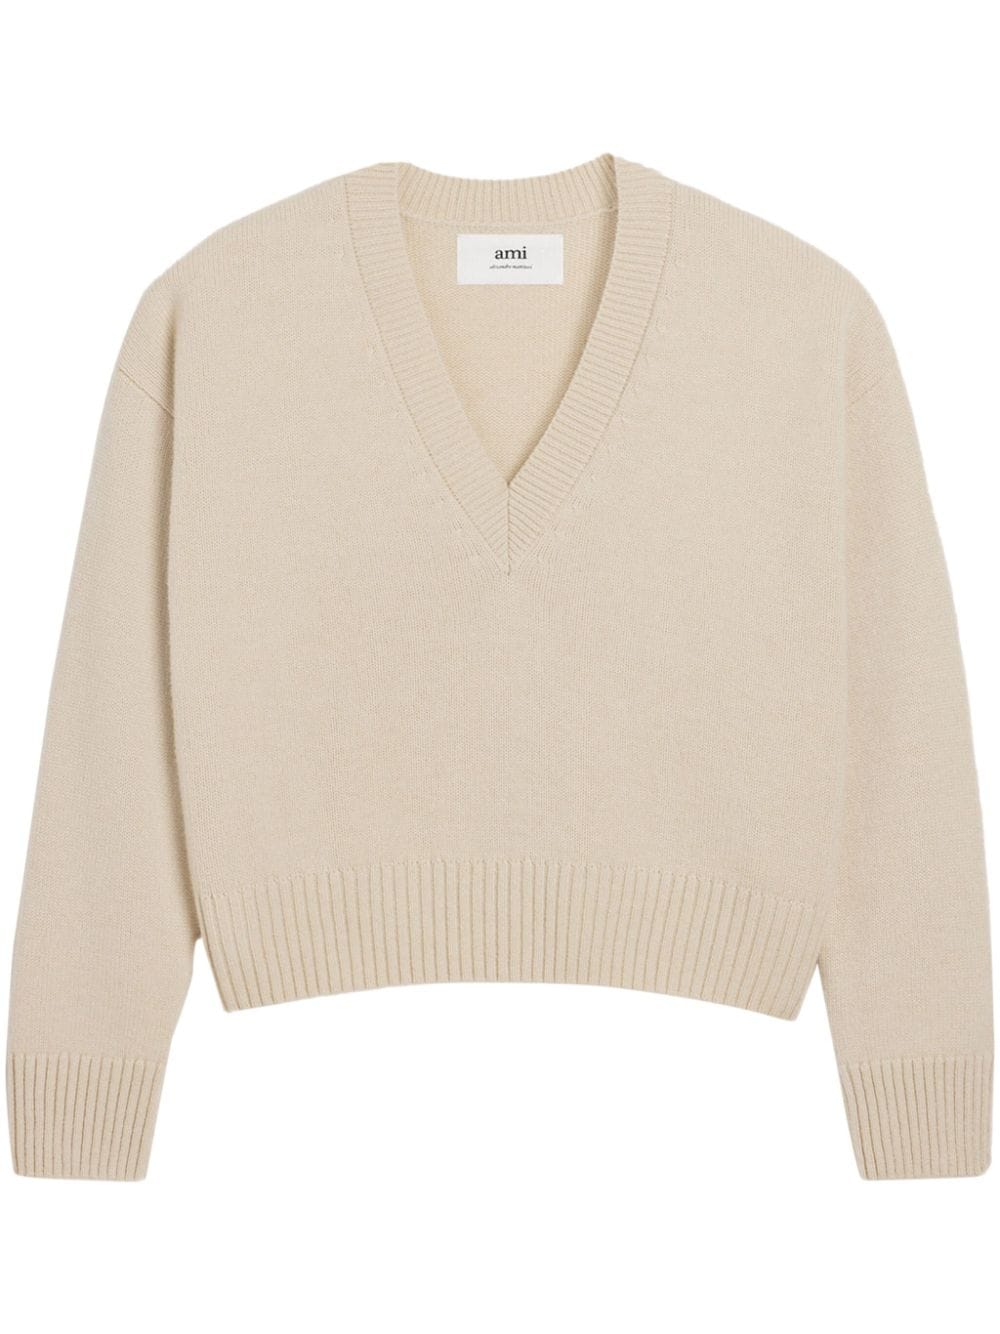 Image 1 of AMI Paris cropped wool-cashmere blend jumper